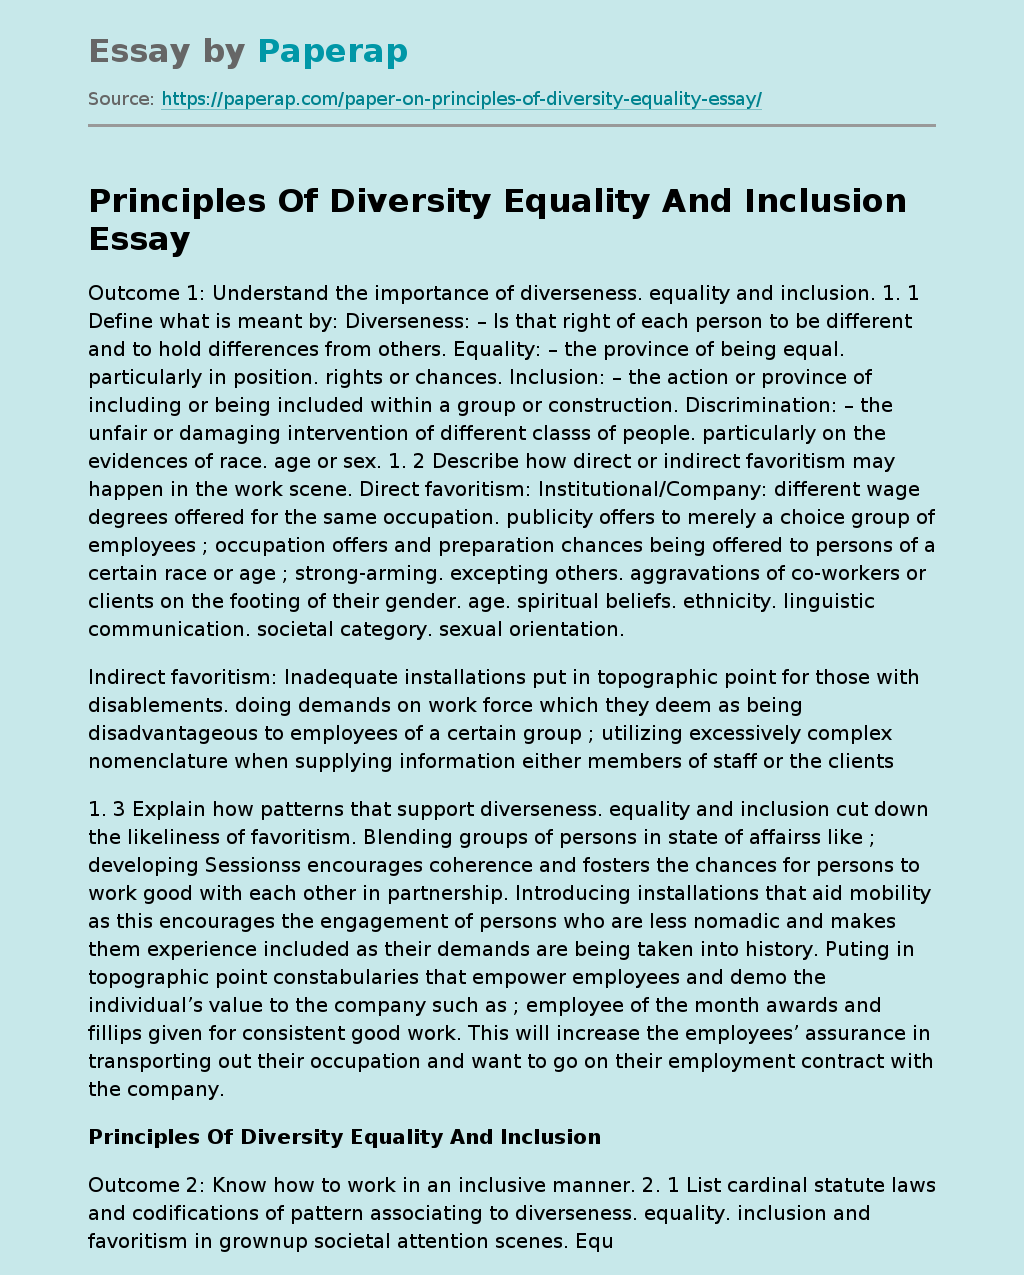 Principles Of Diversity Equality And Inclusion